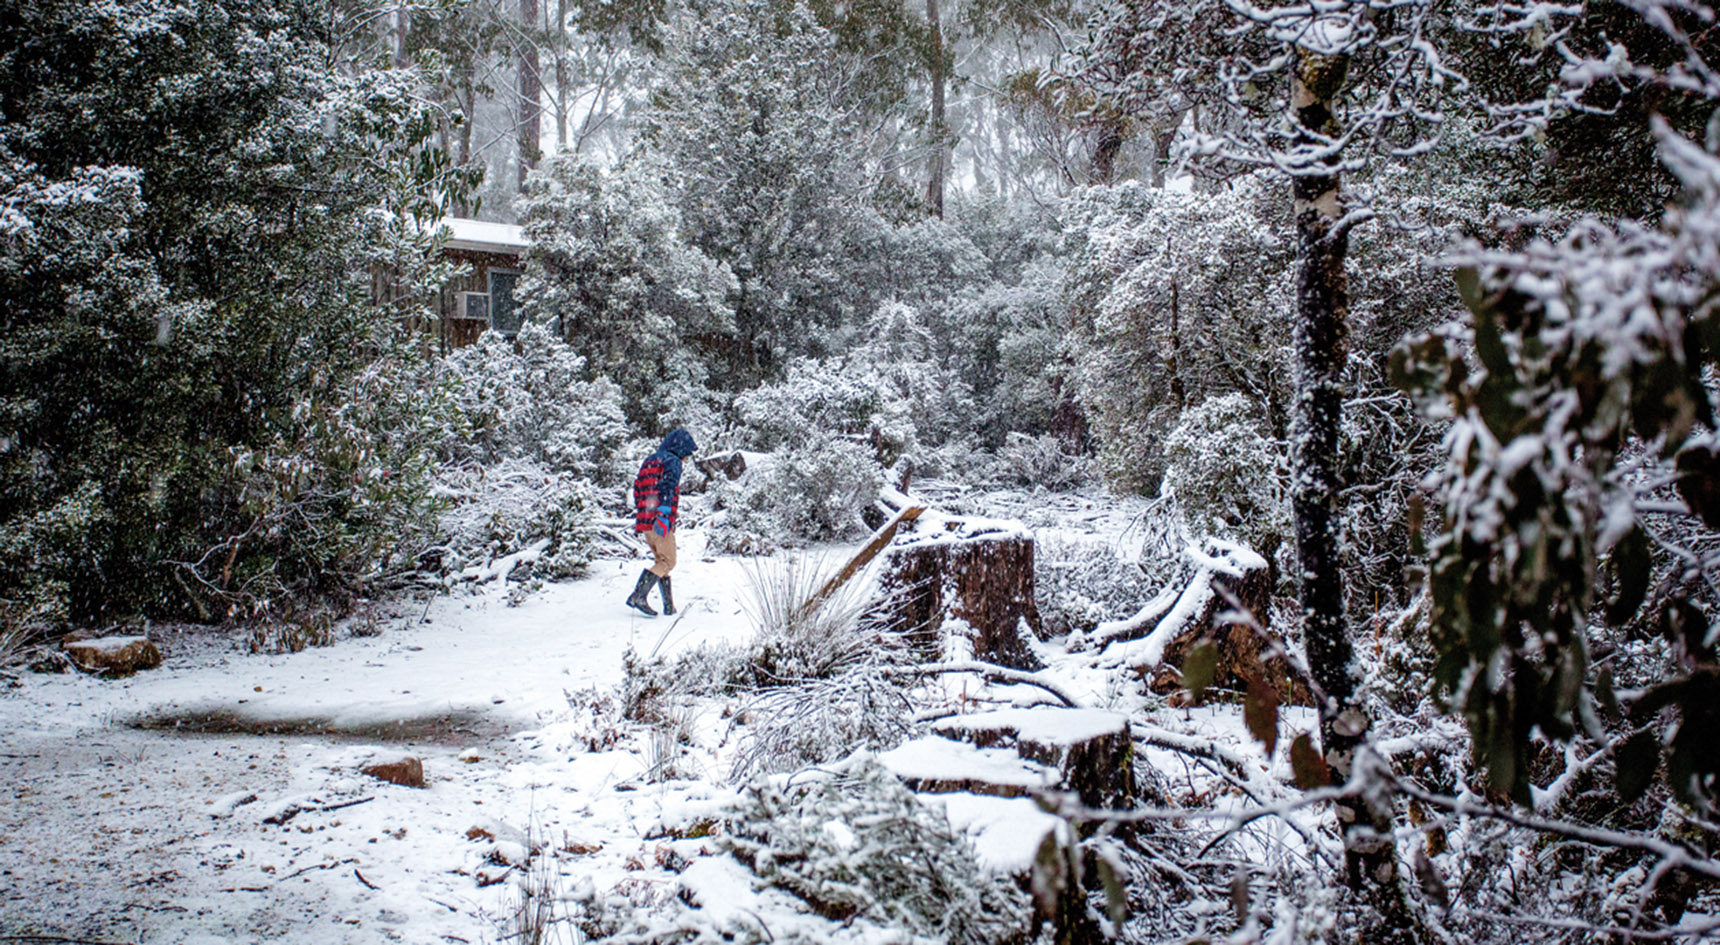 Snow at Discovery Parks Cradle Mountain.